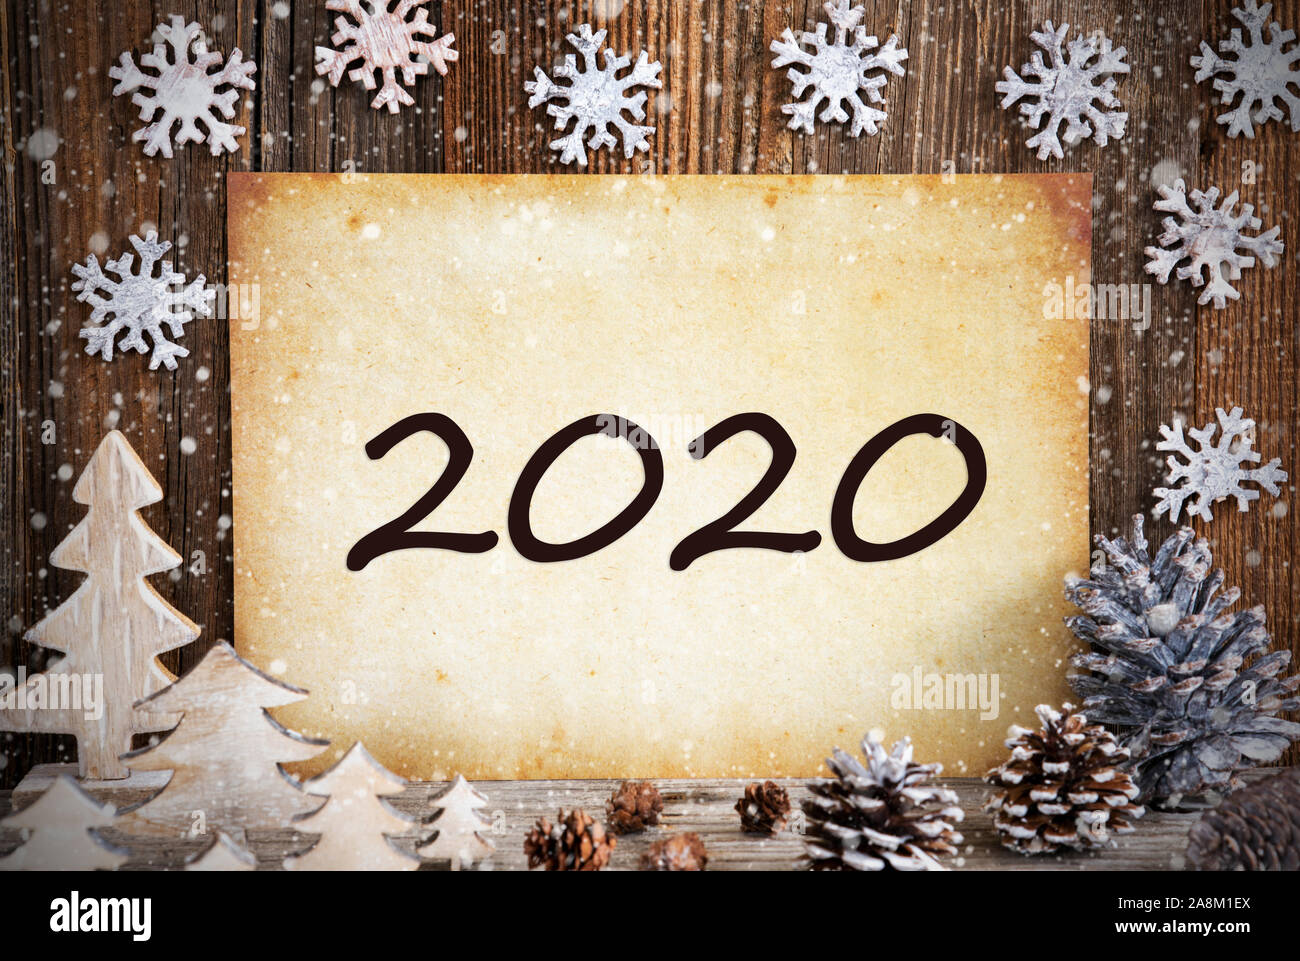 Old Paper With Christmas Decoration, Text 2020, Snowflakes Stock Photo